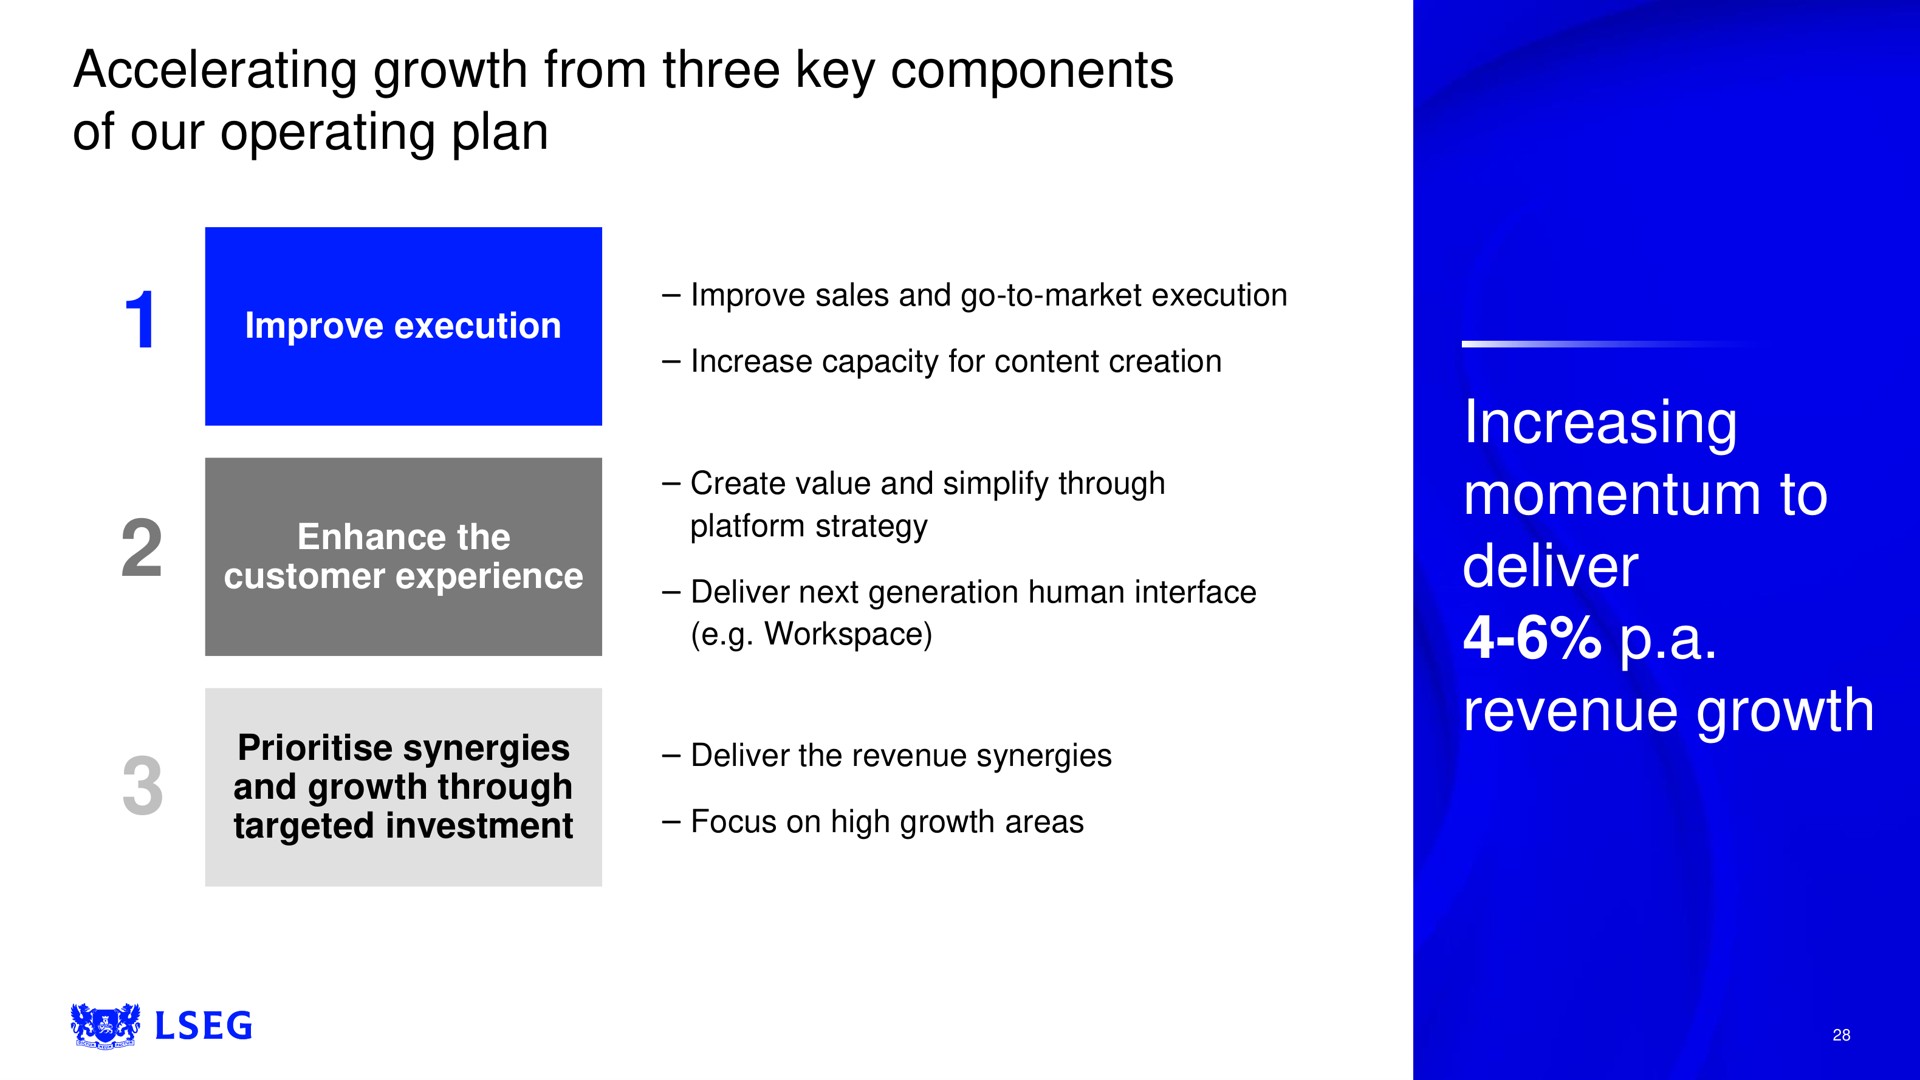 accelerating growth from three key components of our operating plan increasing momentum to deliver a revenue growth | LSE